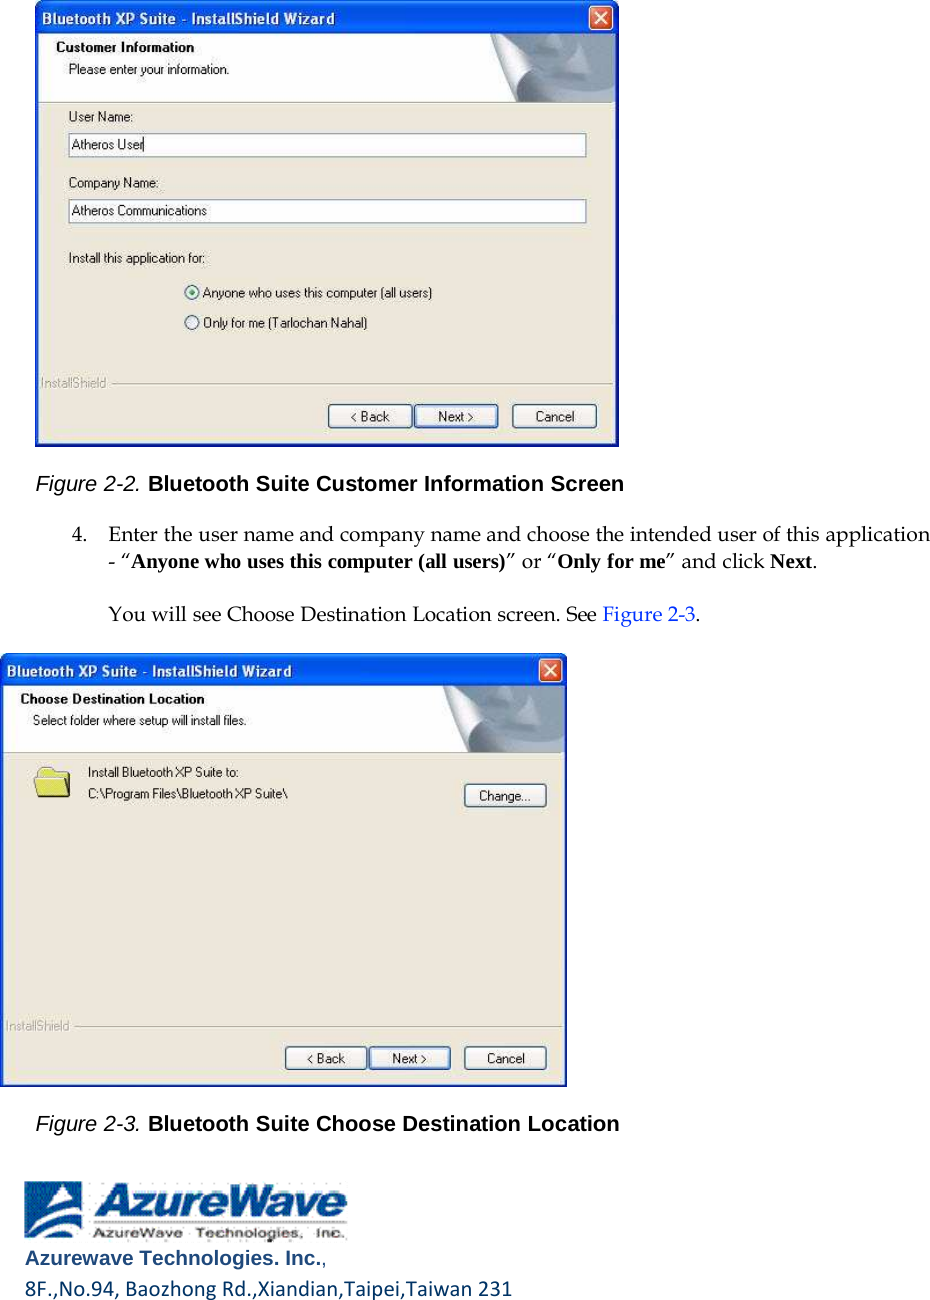       Figure 2-2. Bluetooth Suite Customer Information Screen  4.    Enter the user name and company name and choose the intended user of this application - “Anyone who uses this computer (all users)” or “Only for me” and click Next. You will see Choose Destination Location screen. See Figure 2-3.                       Figure 2-3. Bluetooth Suite Choose Destination Location       Azurewave Technologies. Inc.,8F.,No.94,BaozhongRd.,Xiandian,Taipei,Taiwan231         